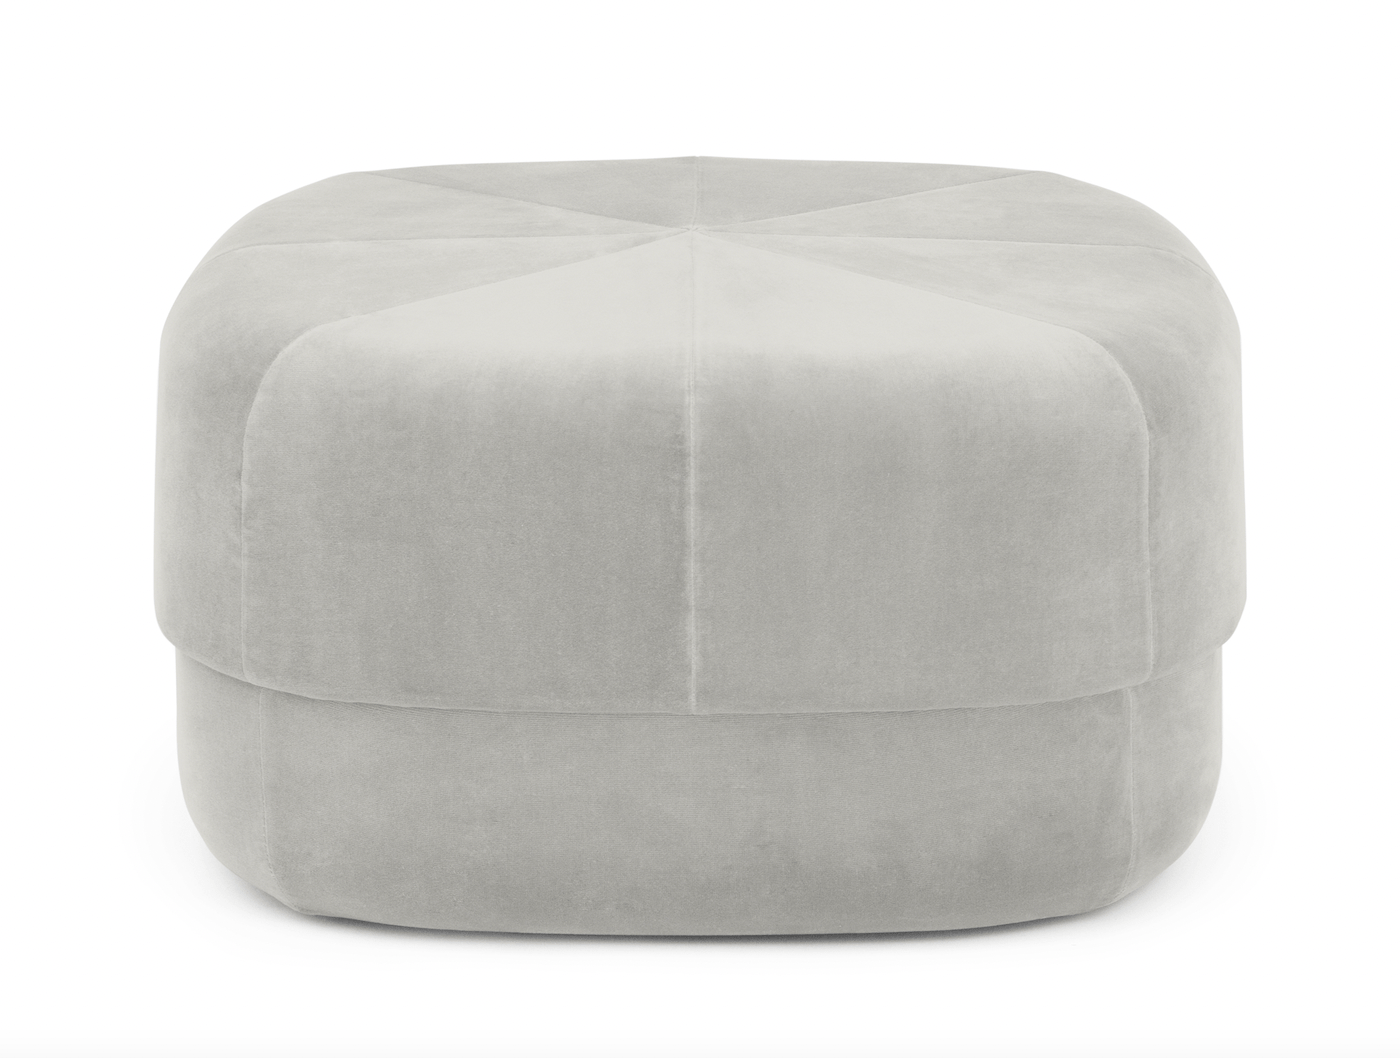 Circus Pouf - Large / Beige